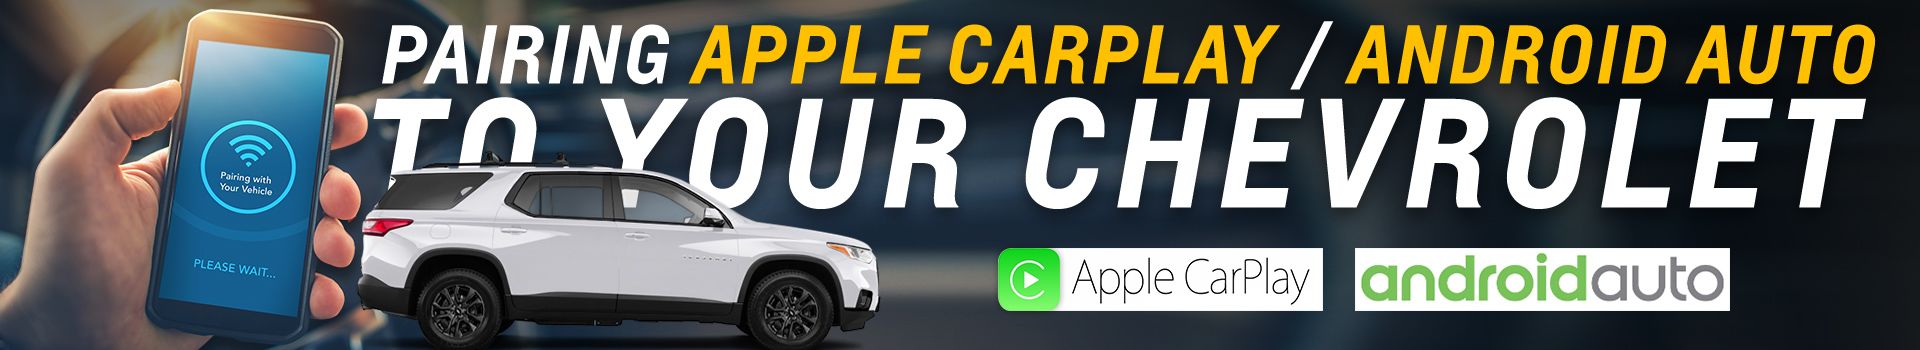 CarPlay | Karl Chevrolet in New Canaan CT